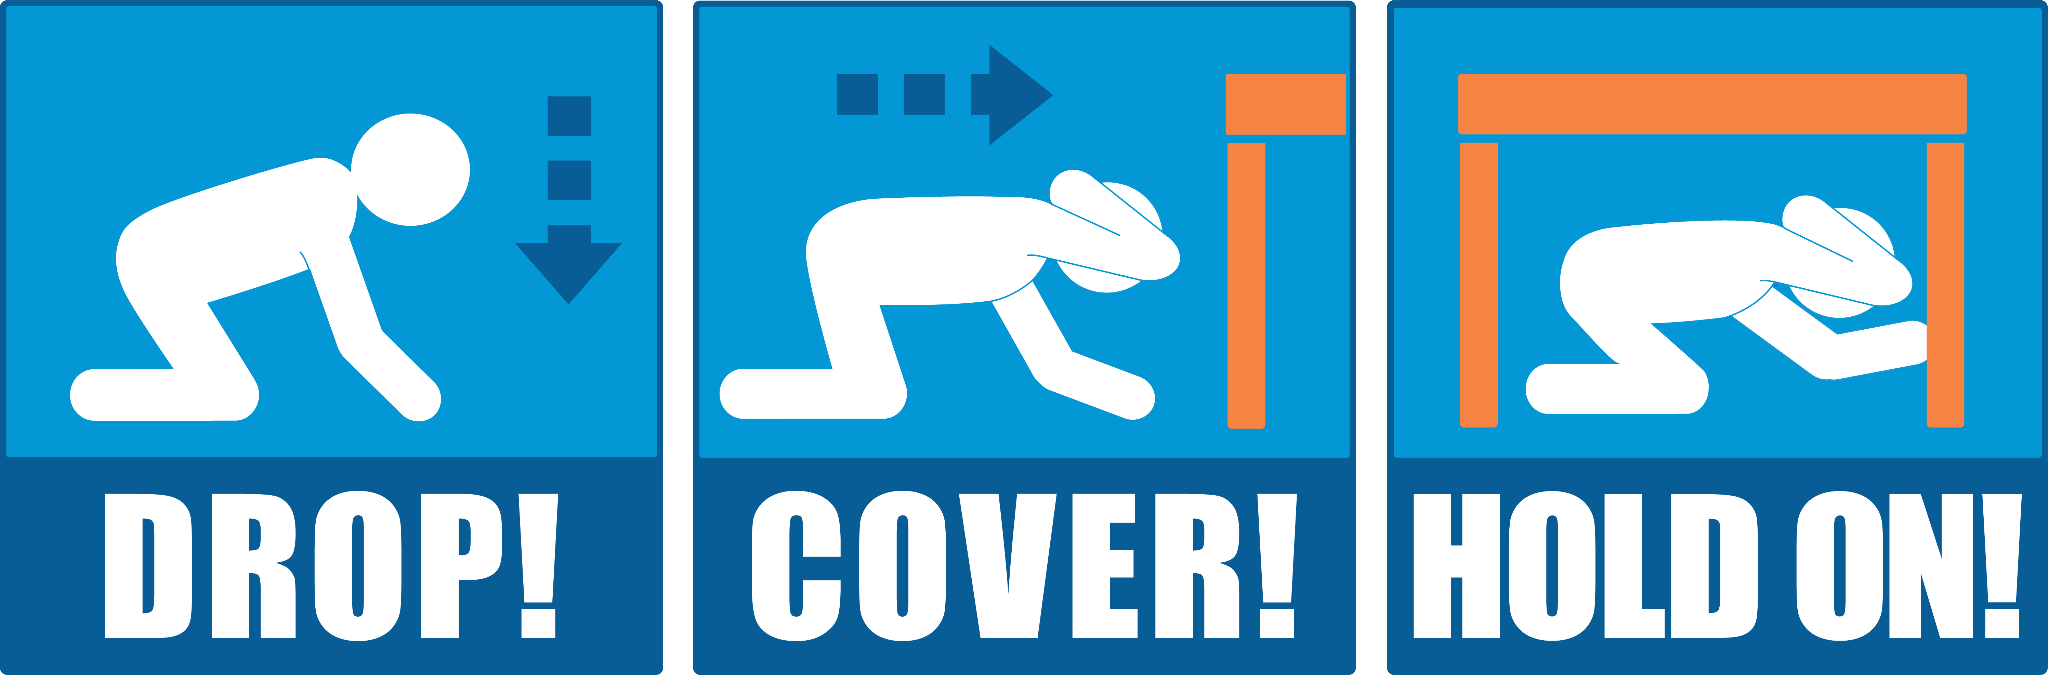 Three part graphic shows a figure dropping, finding cover under a table, and holding on.